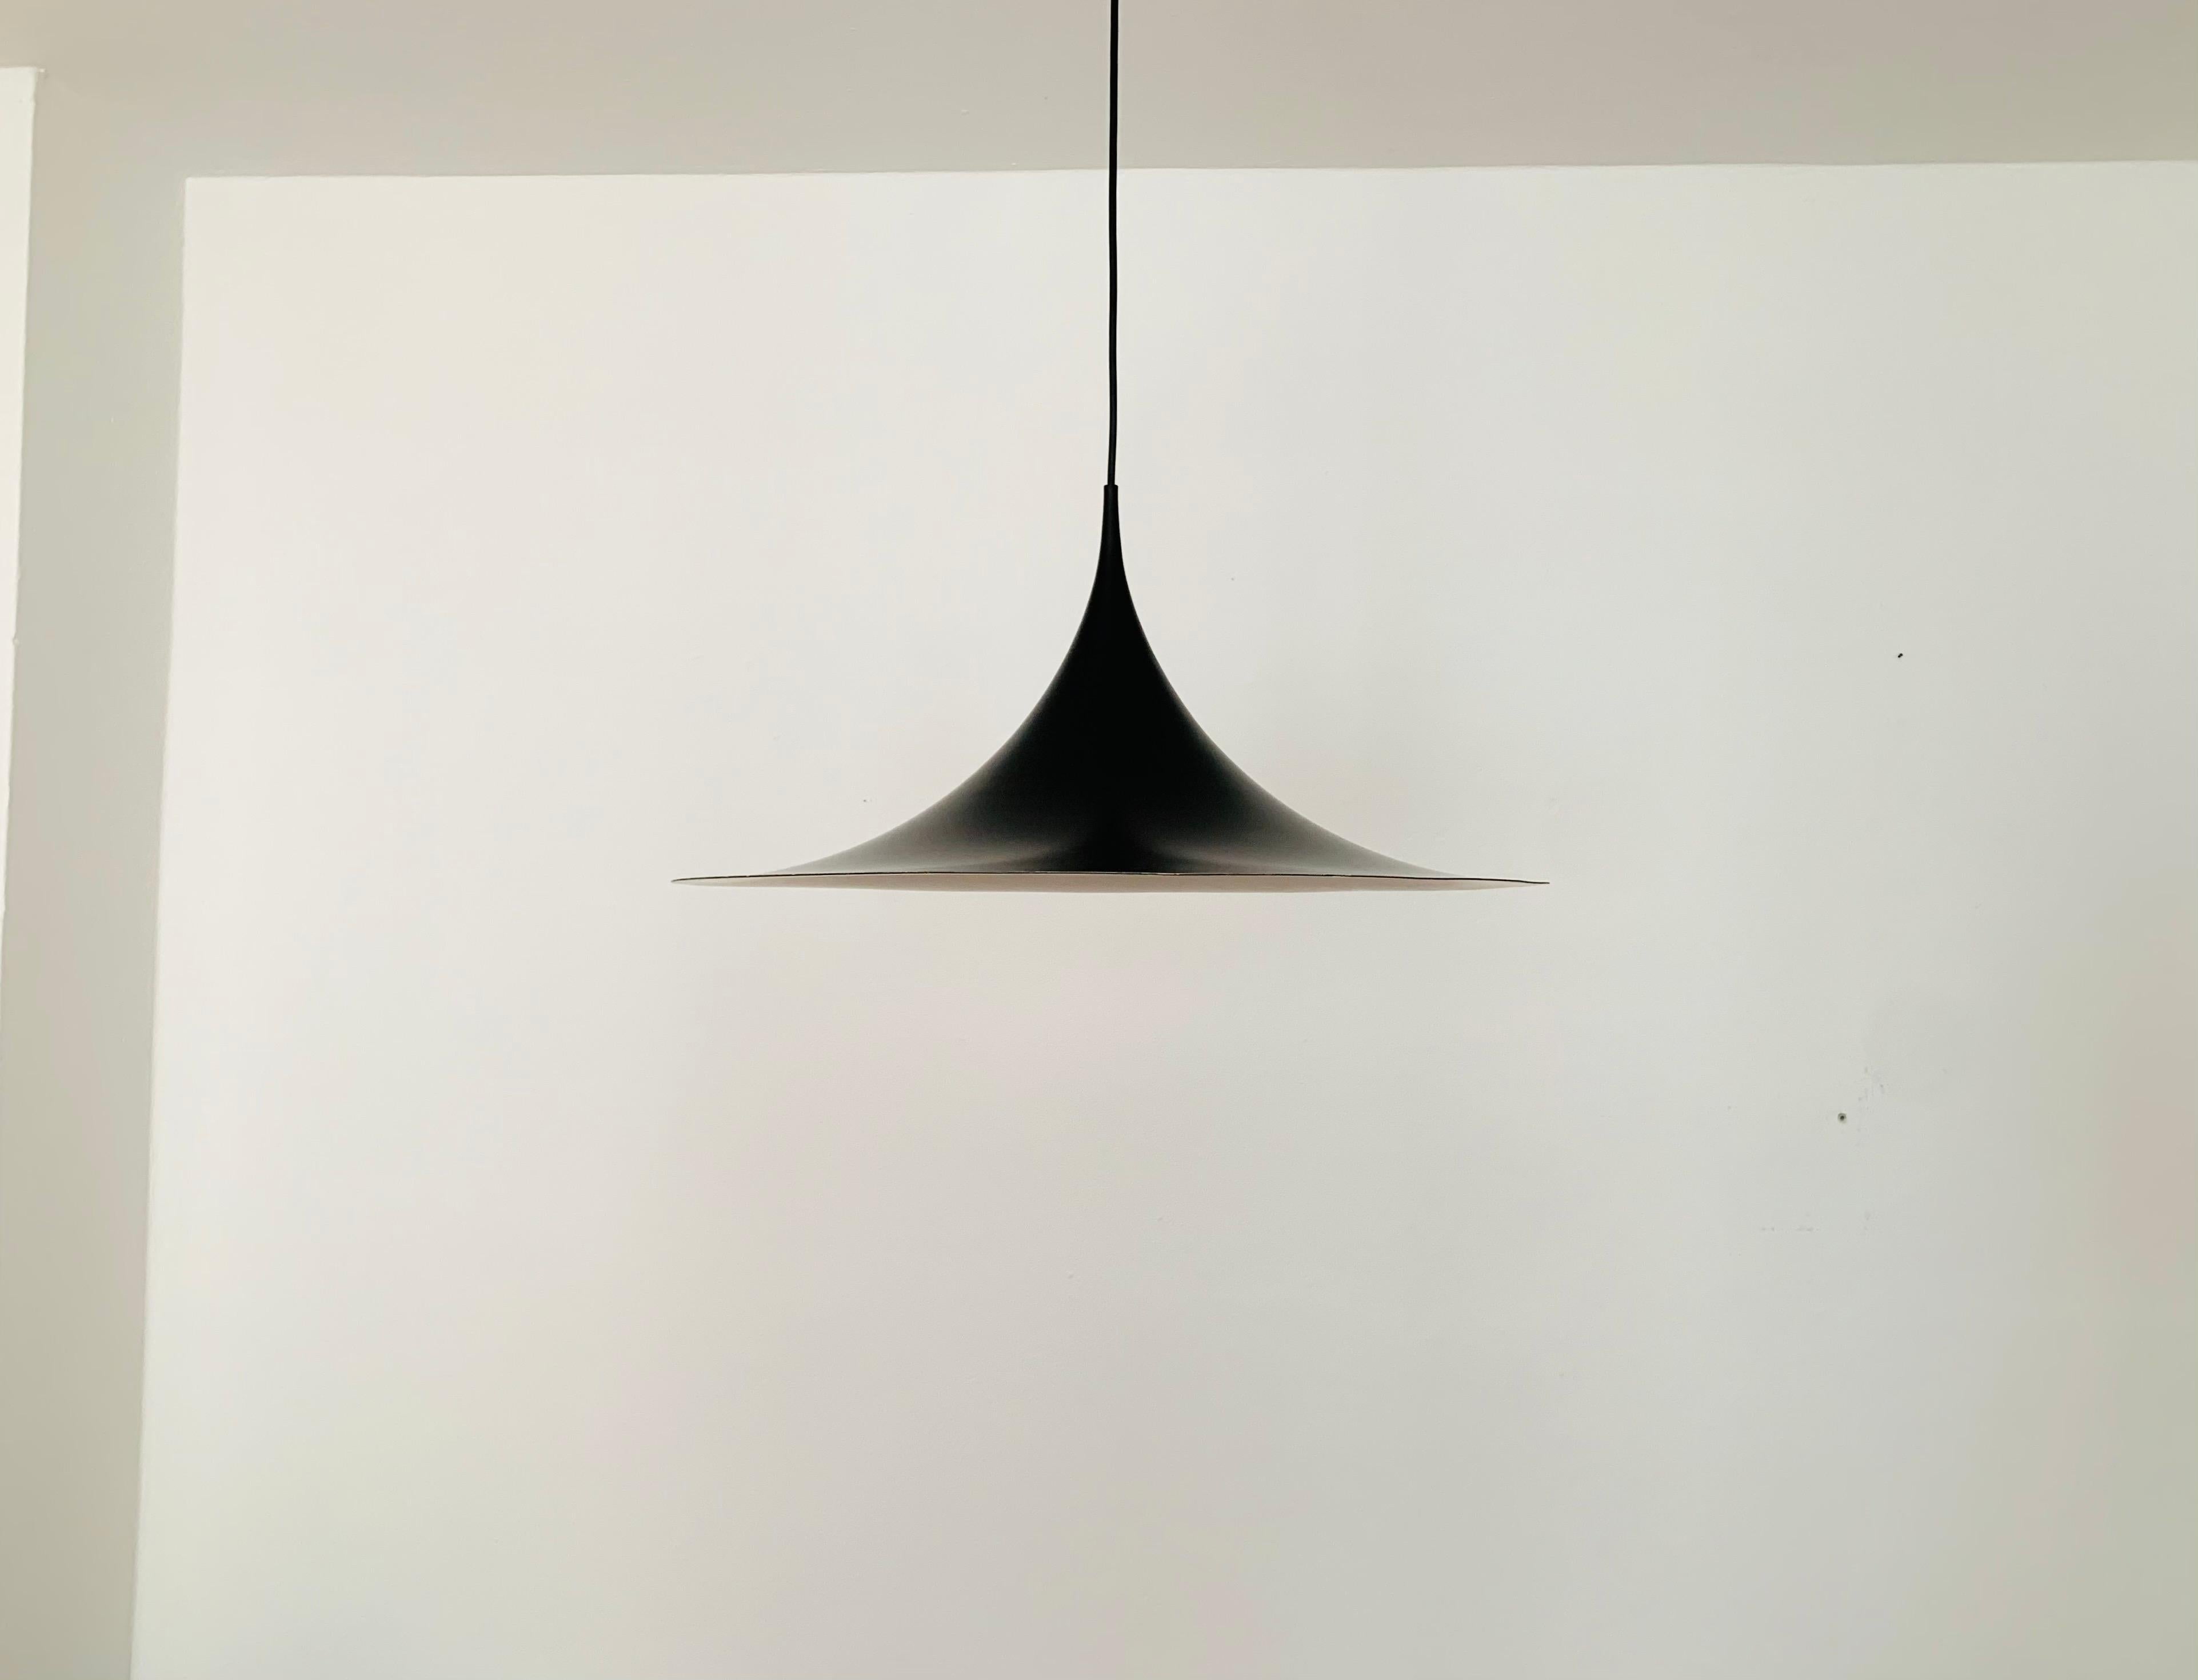 Mid-20th Century Semi pendant lamp by Bonderup and Thorup for Fog and Morup